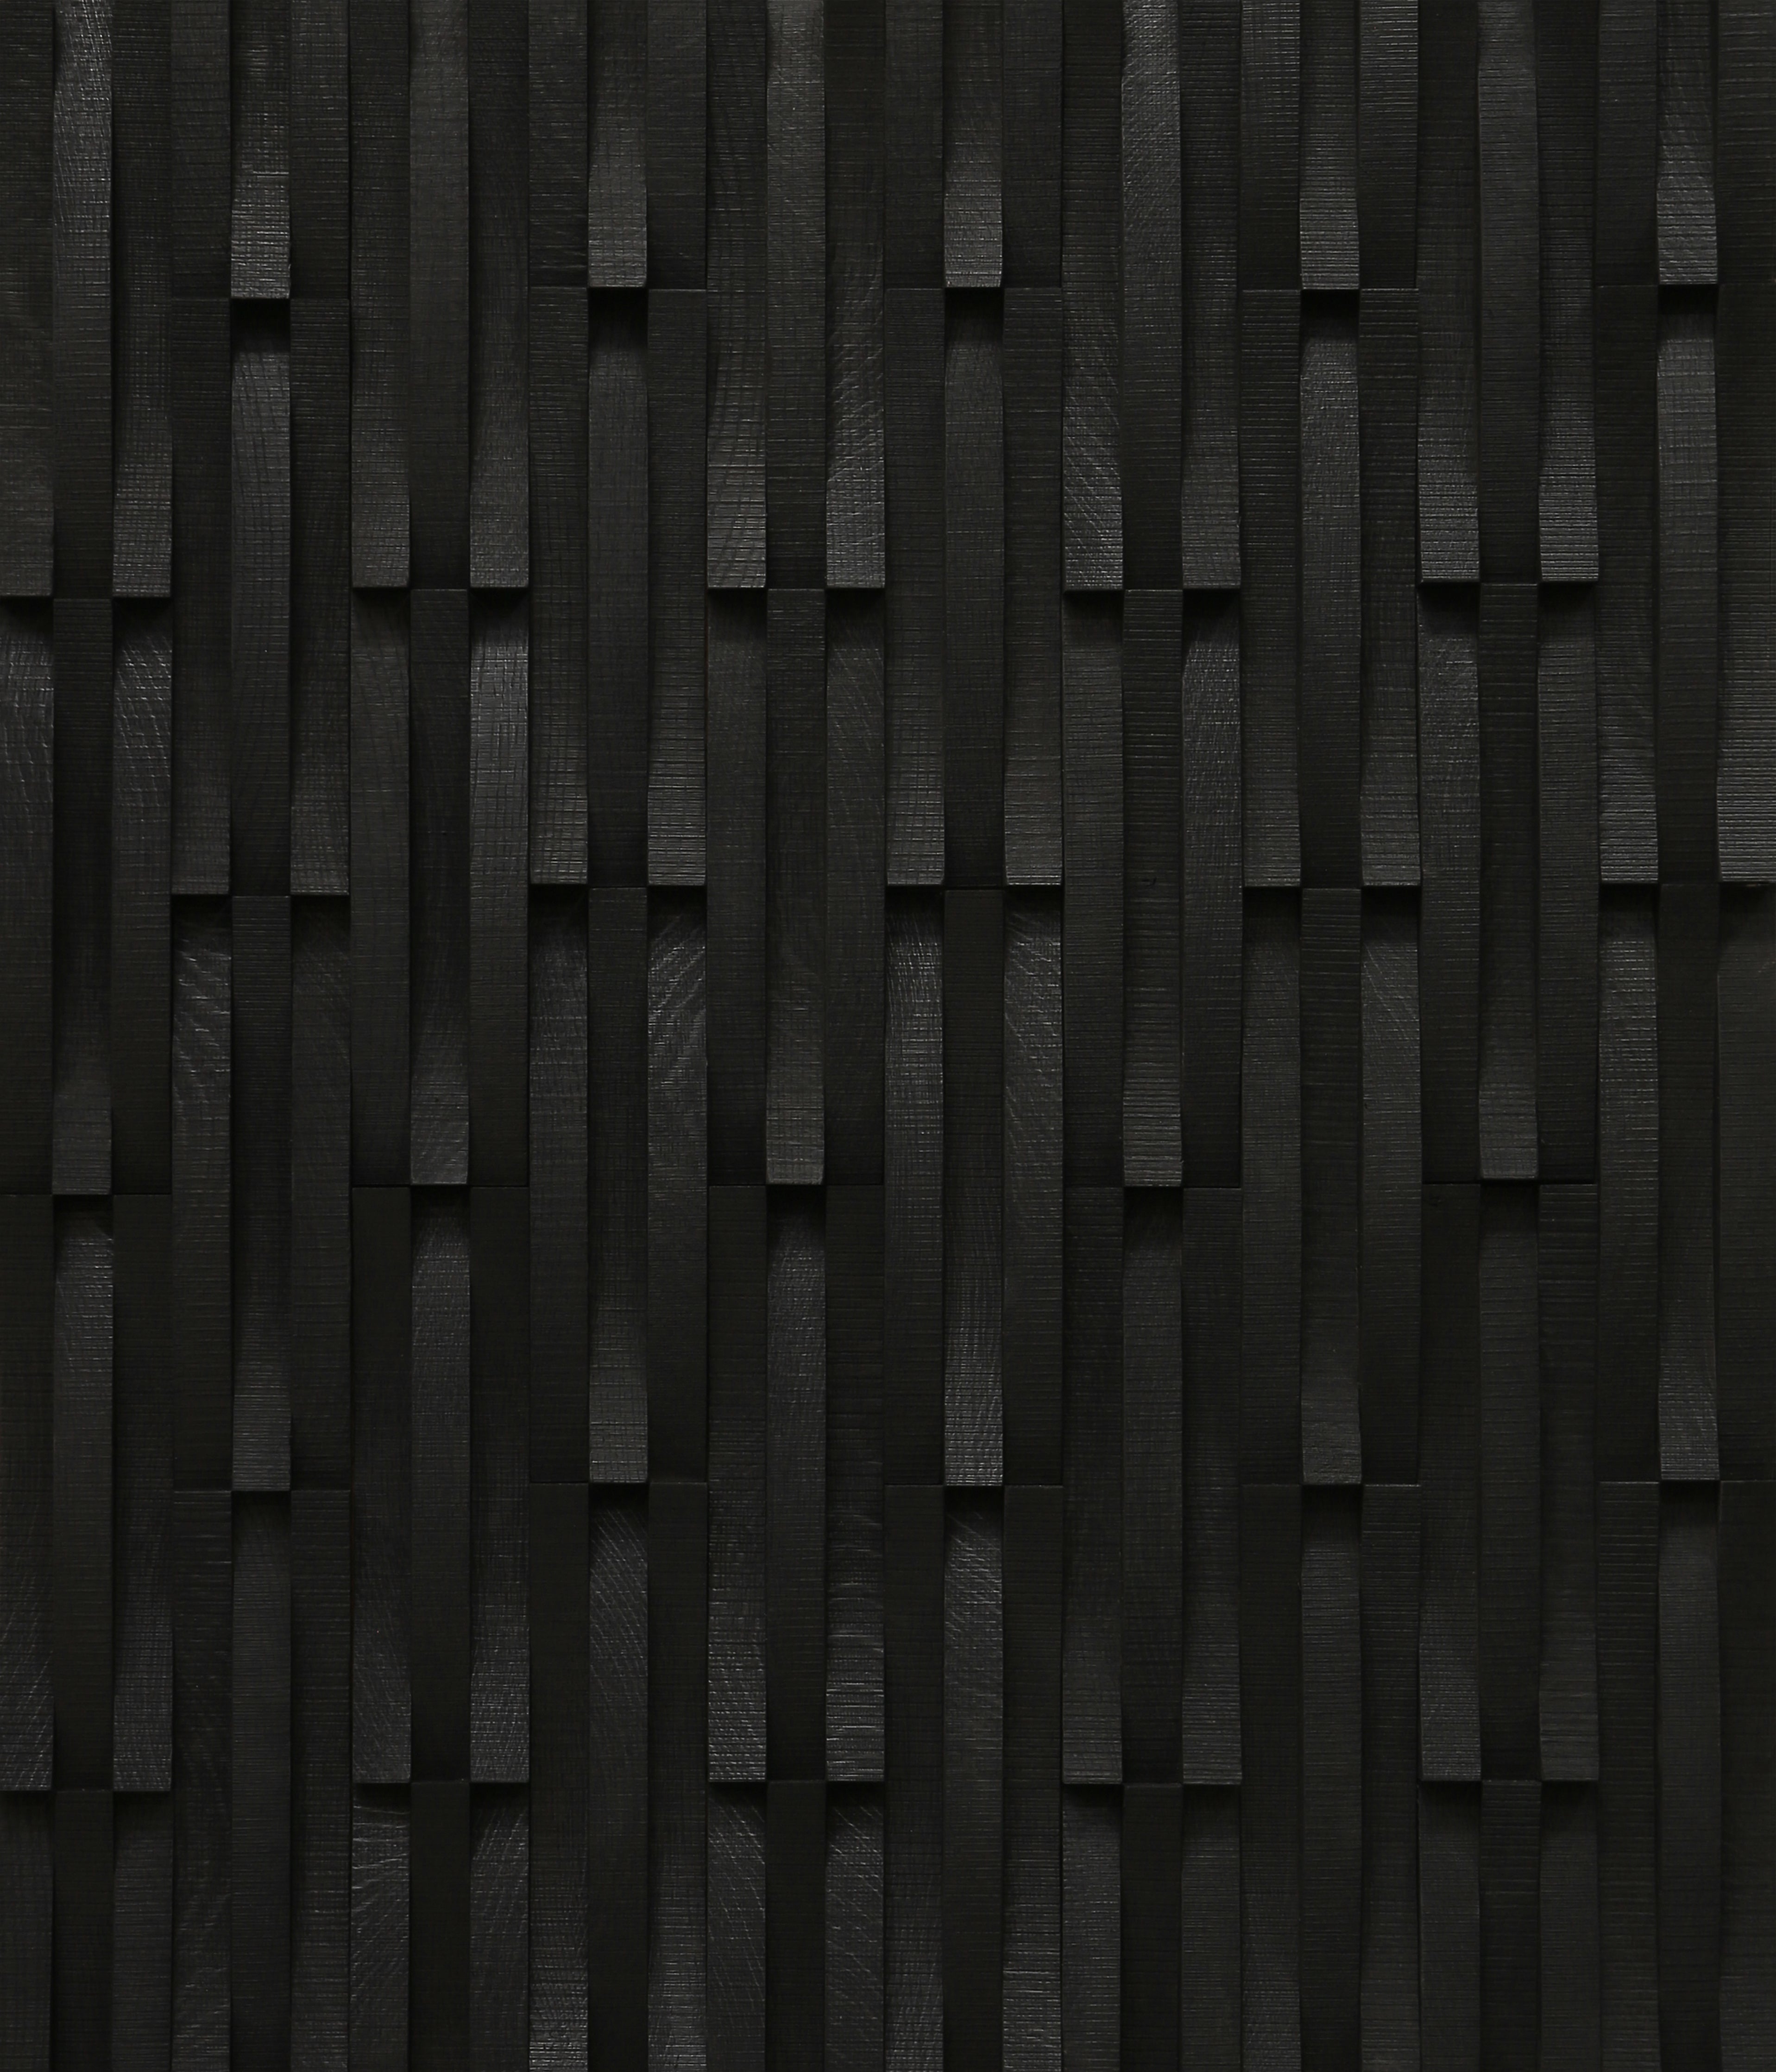 duchateau inceptiv krescent noir oak three dimensional wall natural wood panel lacquer for interior use distributed by surface group international